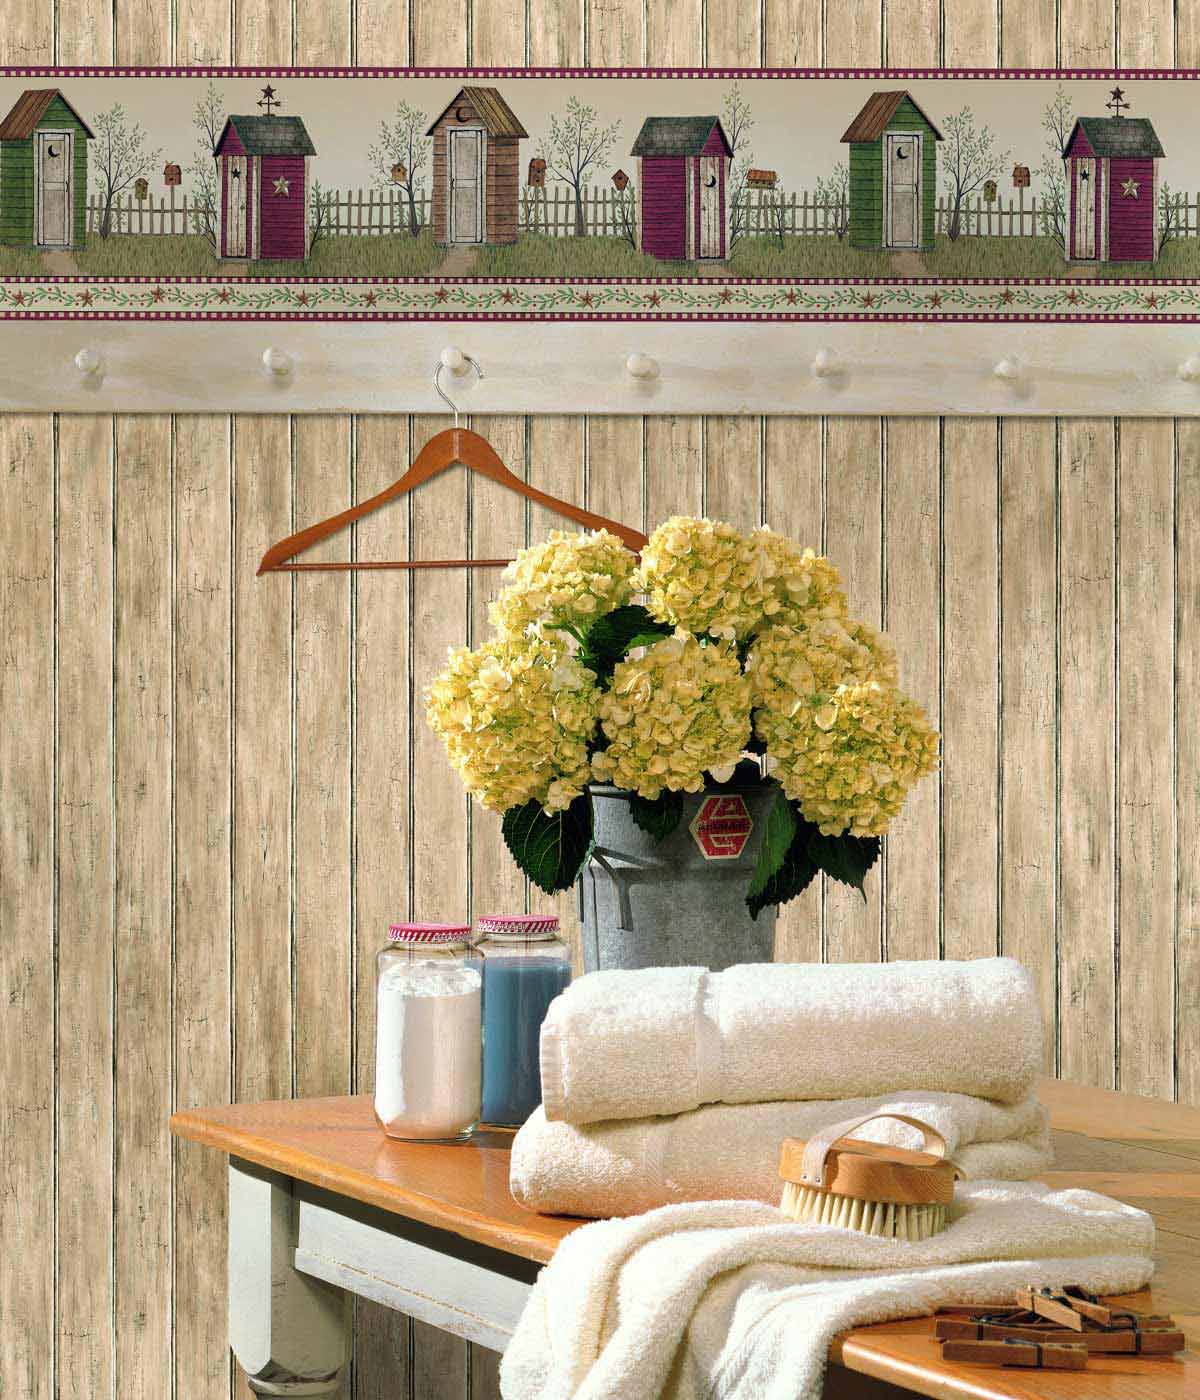 Wallpaper In The Laundry Room  Wallpaper Installation Guide